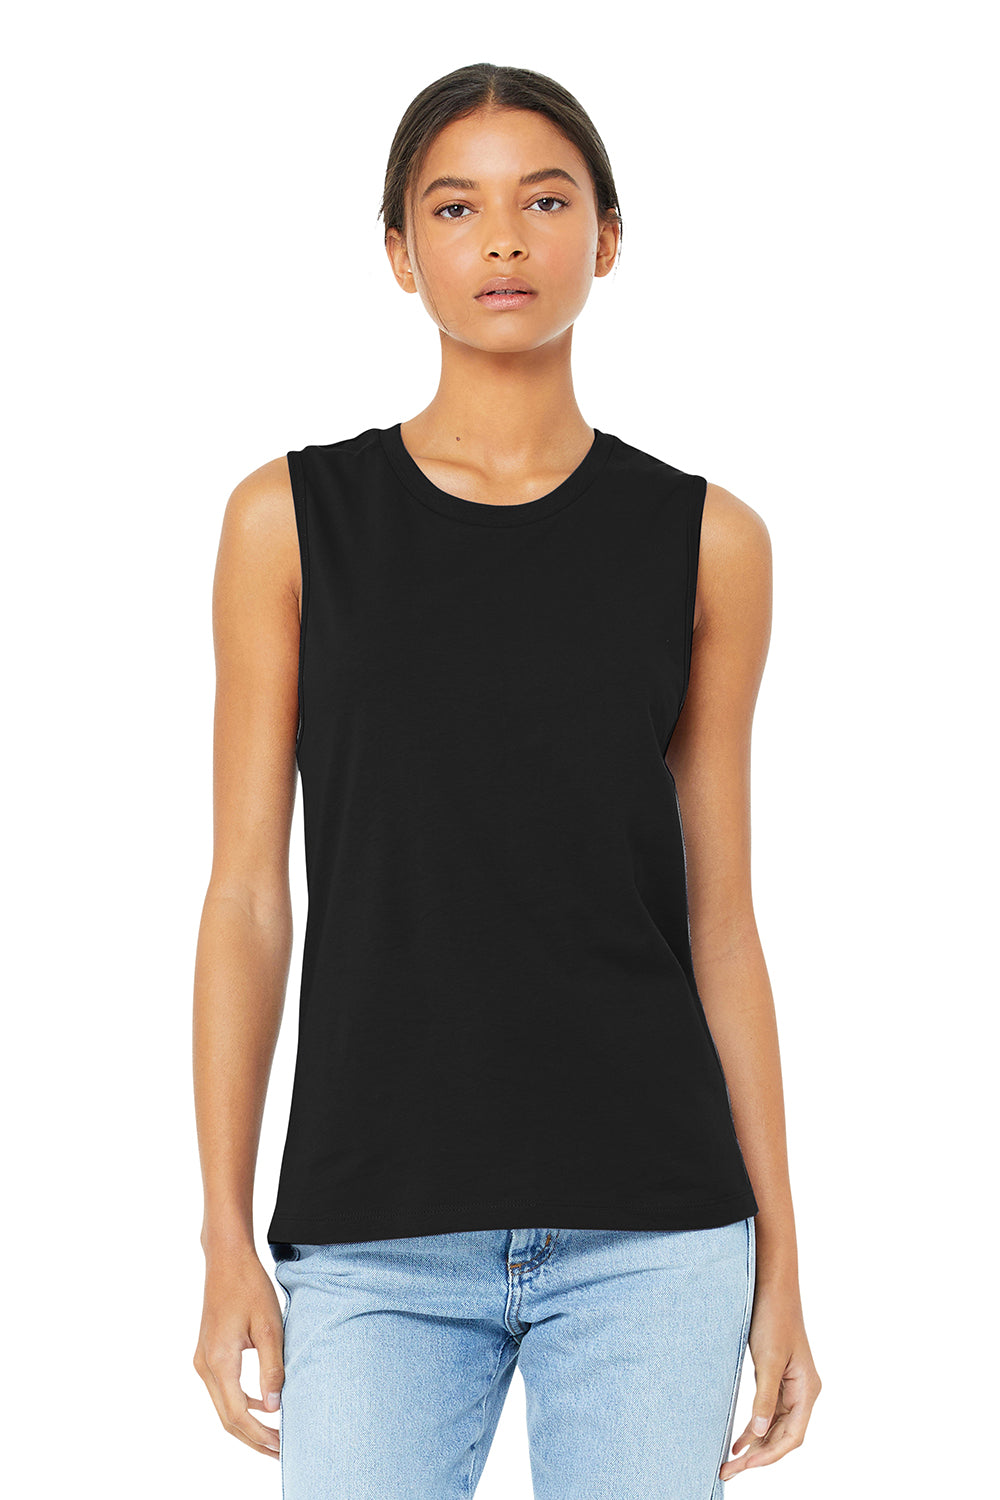 Bella + Canvas BC6003/B6003/6003 Womens Jersey Muscle Tank Top Black Model Front